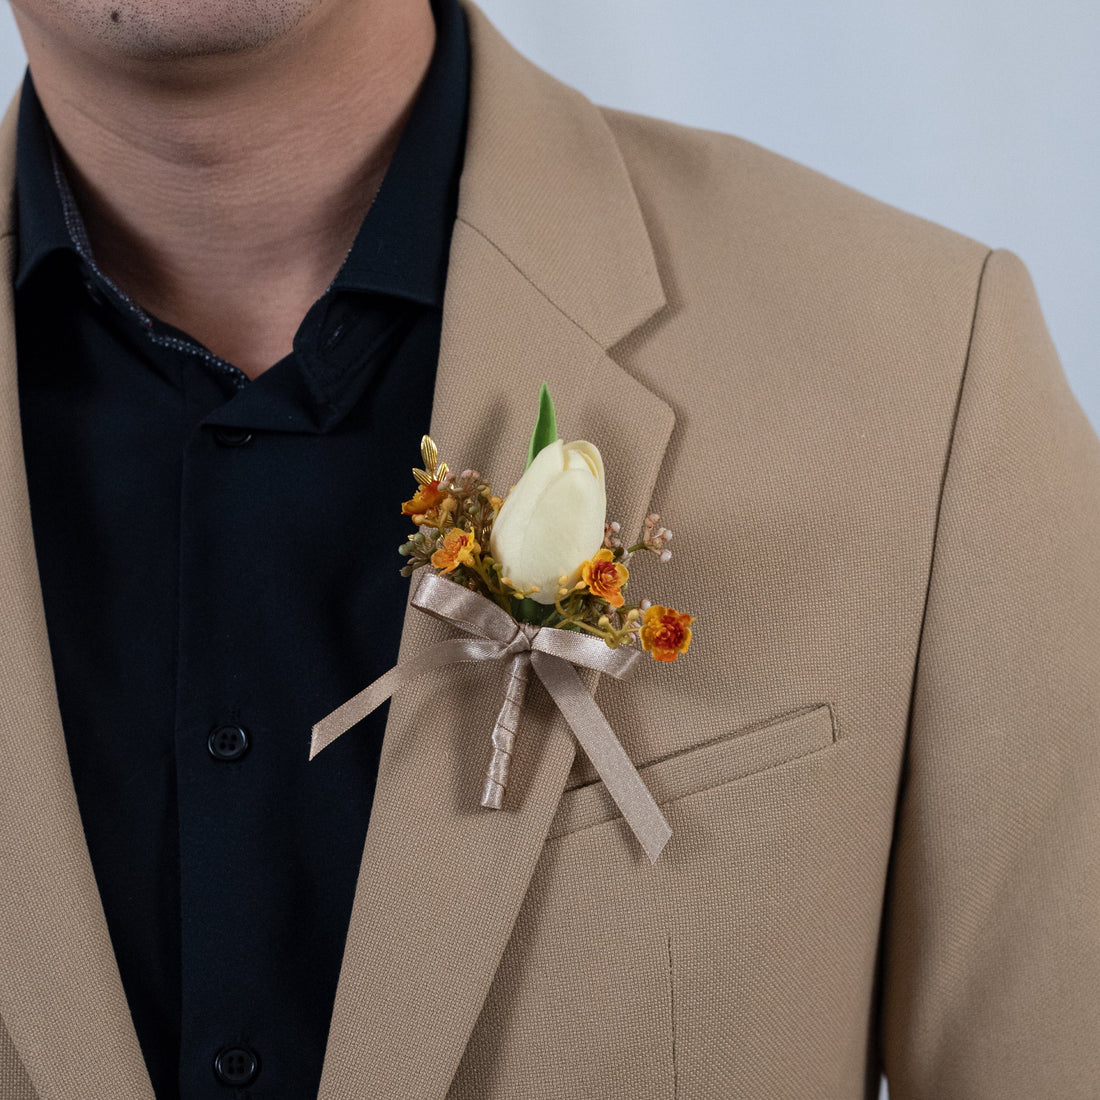 Harmony in blossom boutonniere